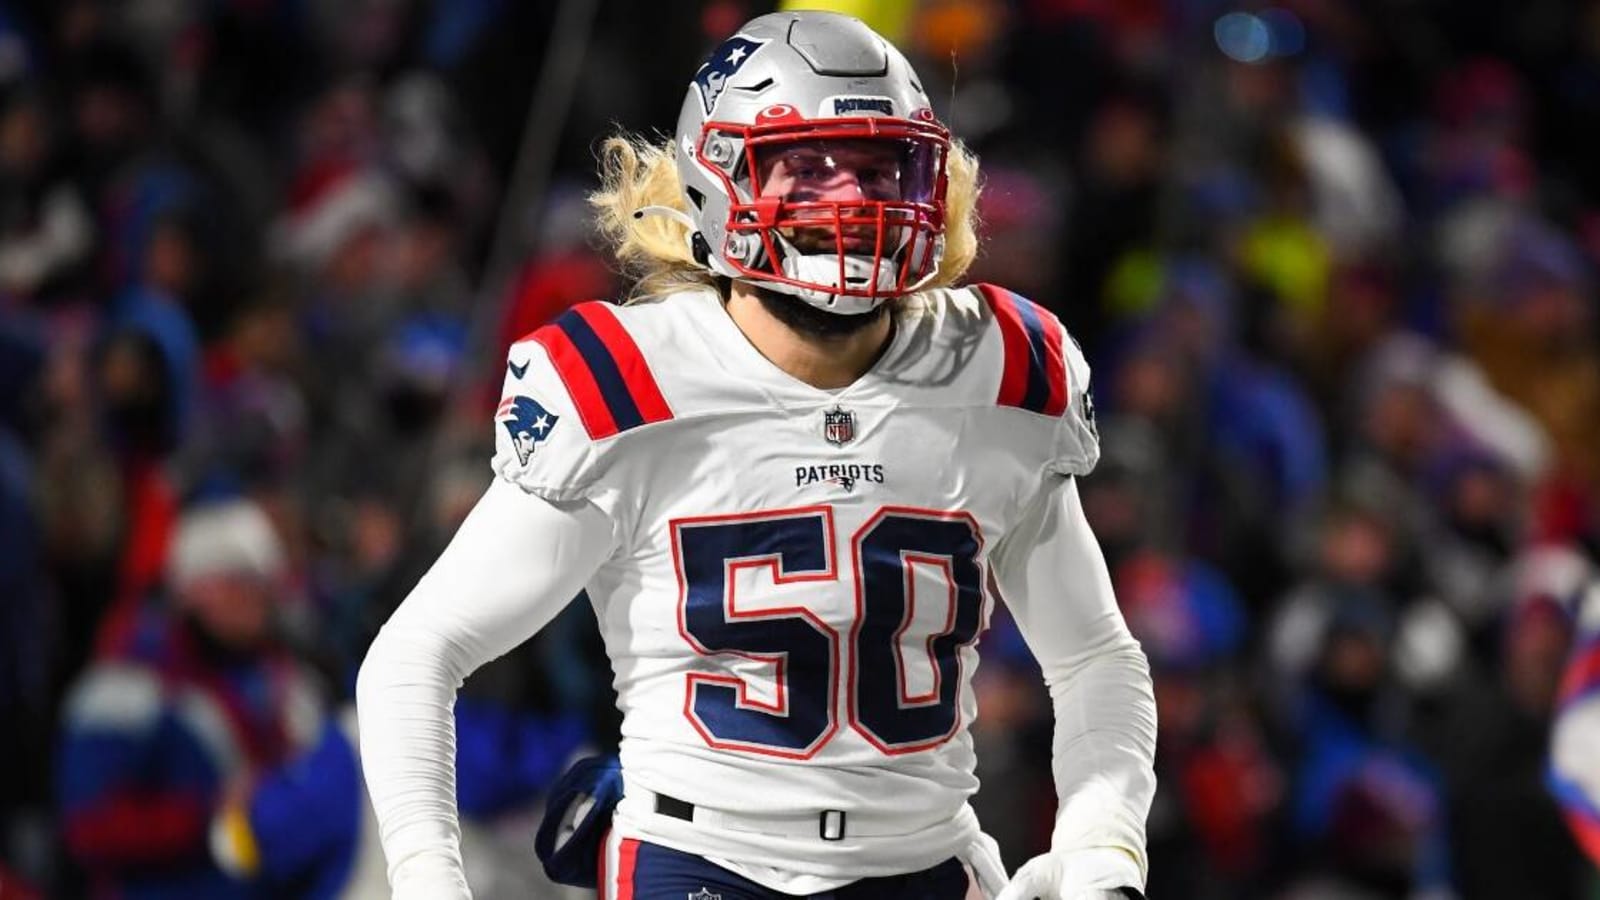 Chase Winovich announces retirement from NFL